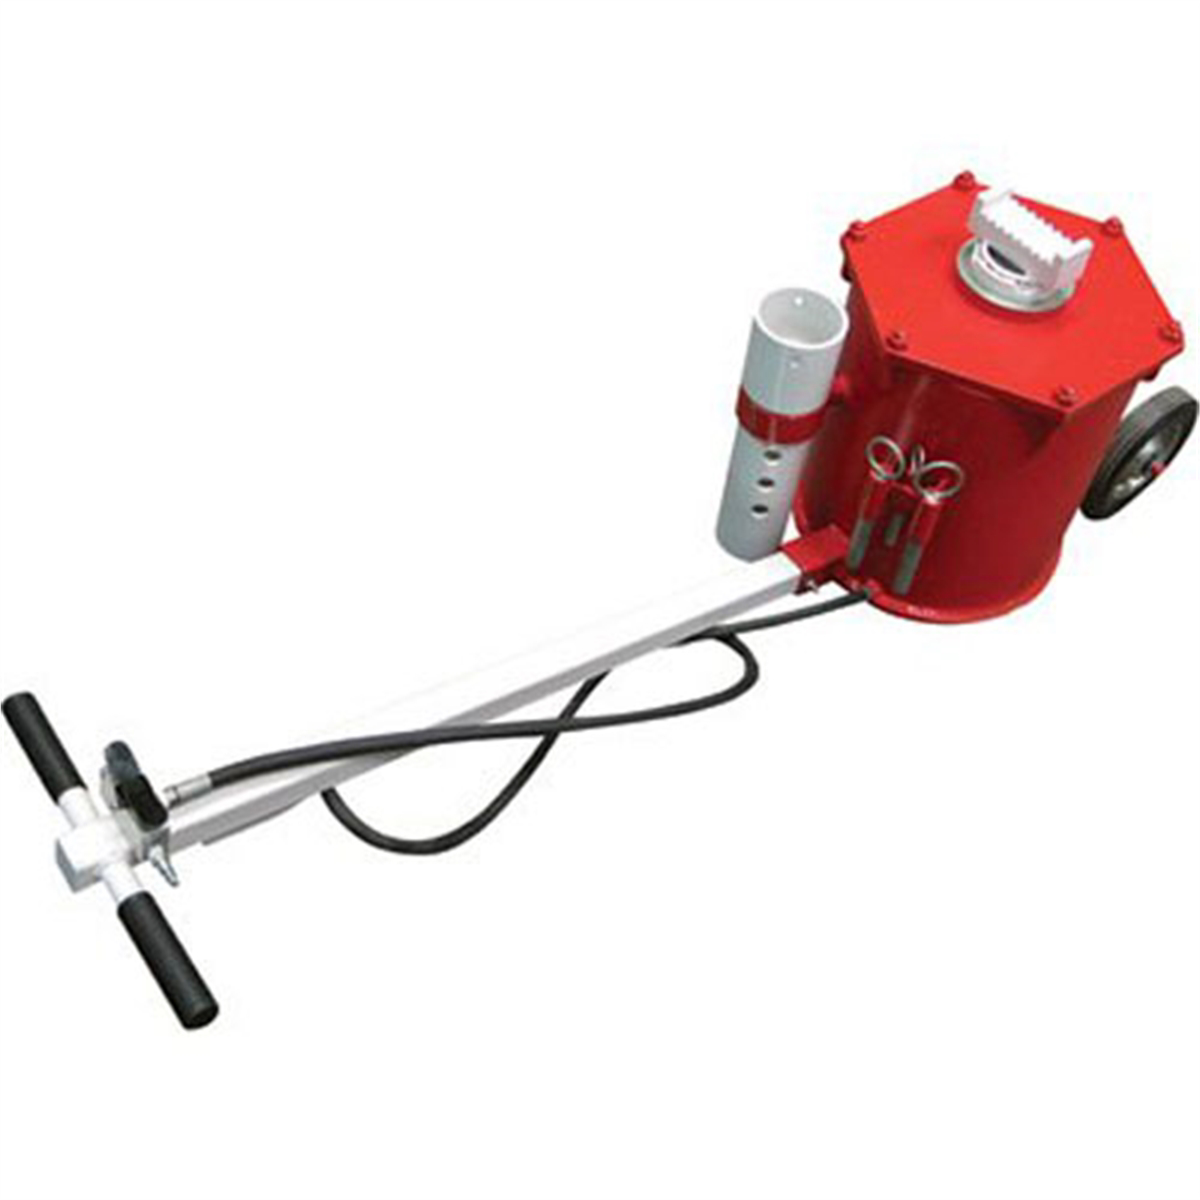 ATD-7350A - 10-Ton Air Jack/Support Stand - ATD Tools, Inc.